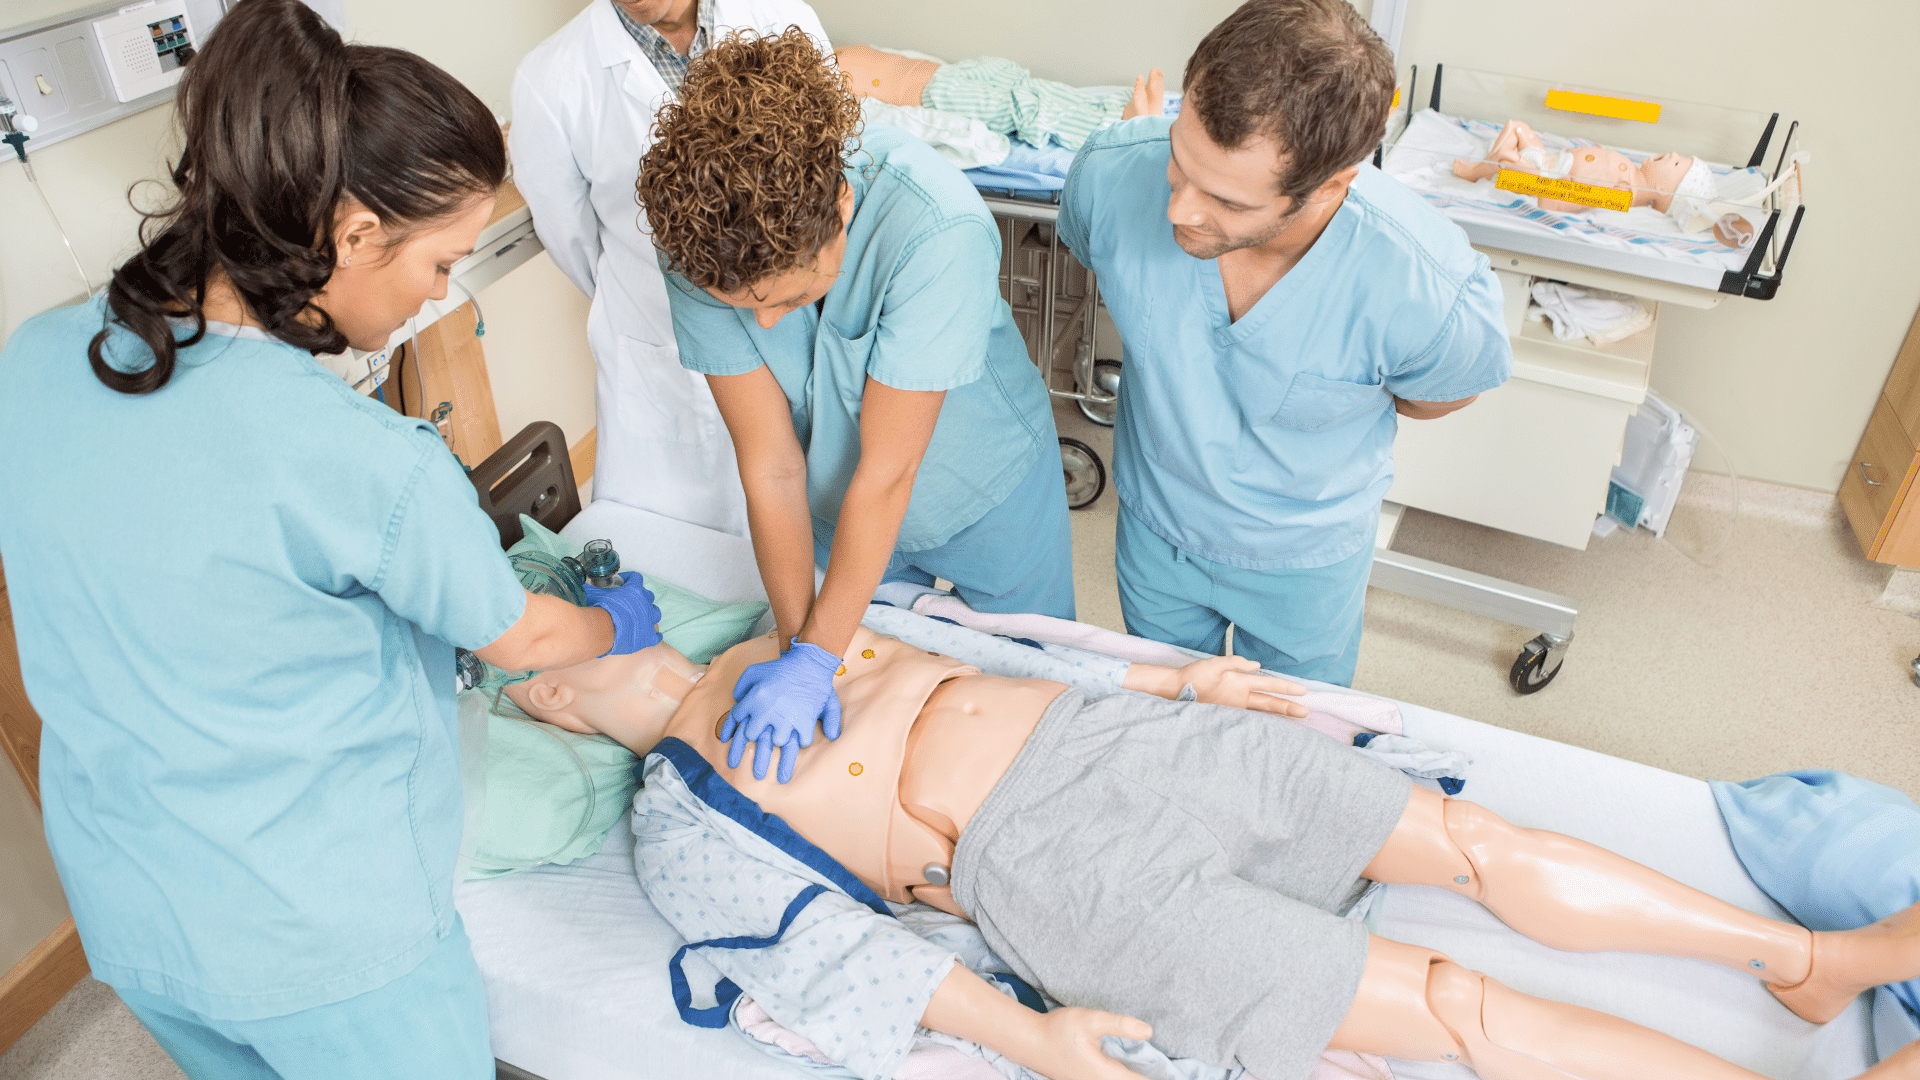 Nursing course  Everything you need to know to pursue this course!